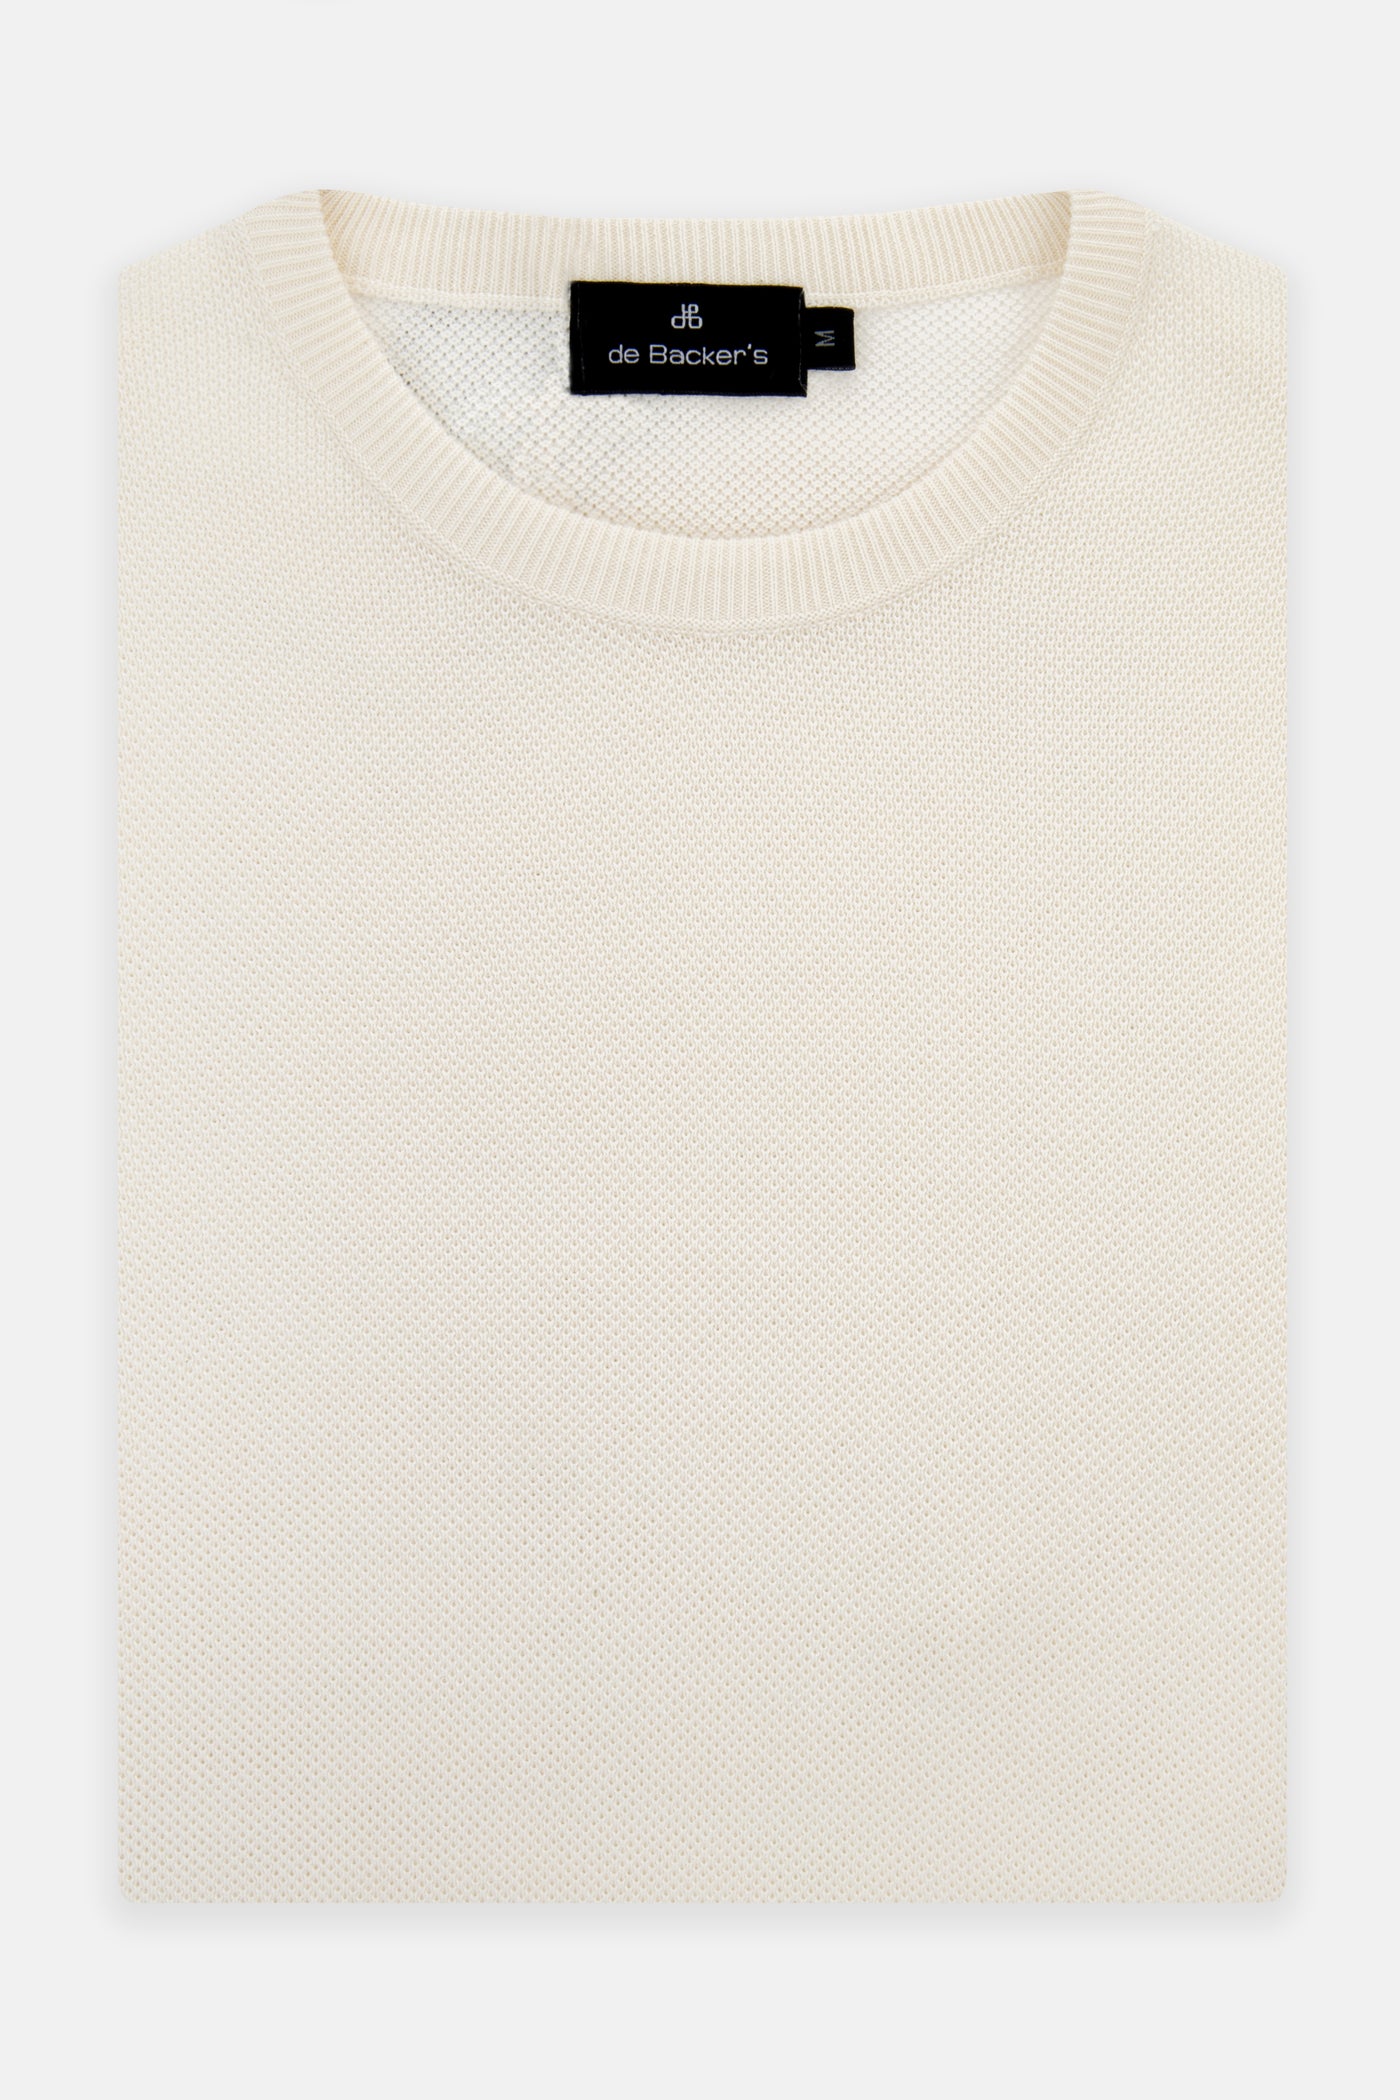 Jacquard Off-White  Knitted  Round T Shirt